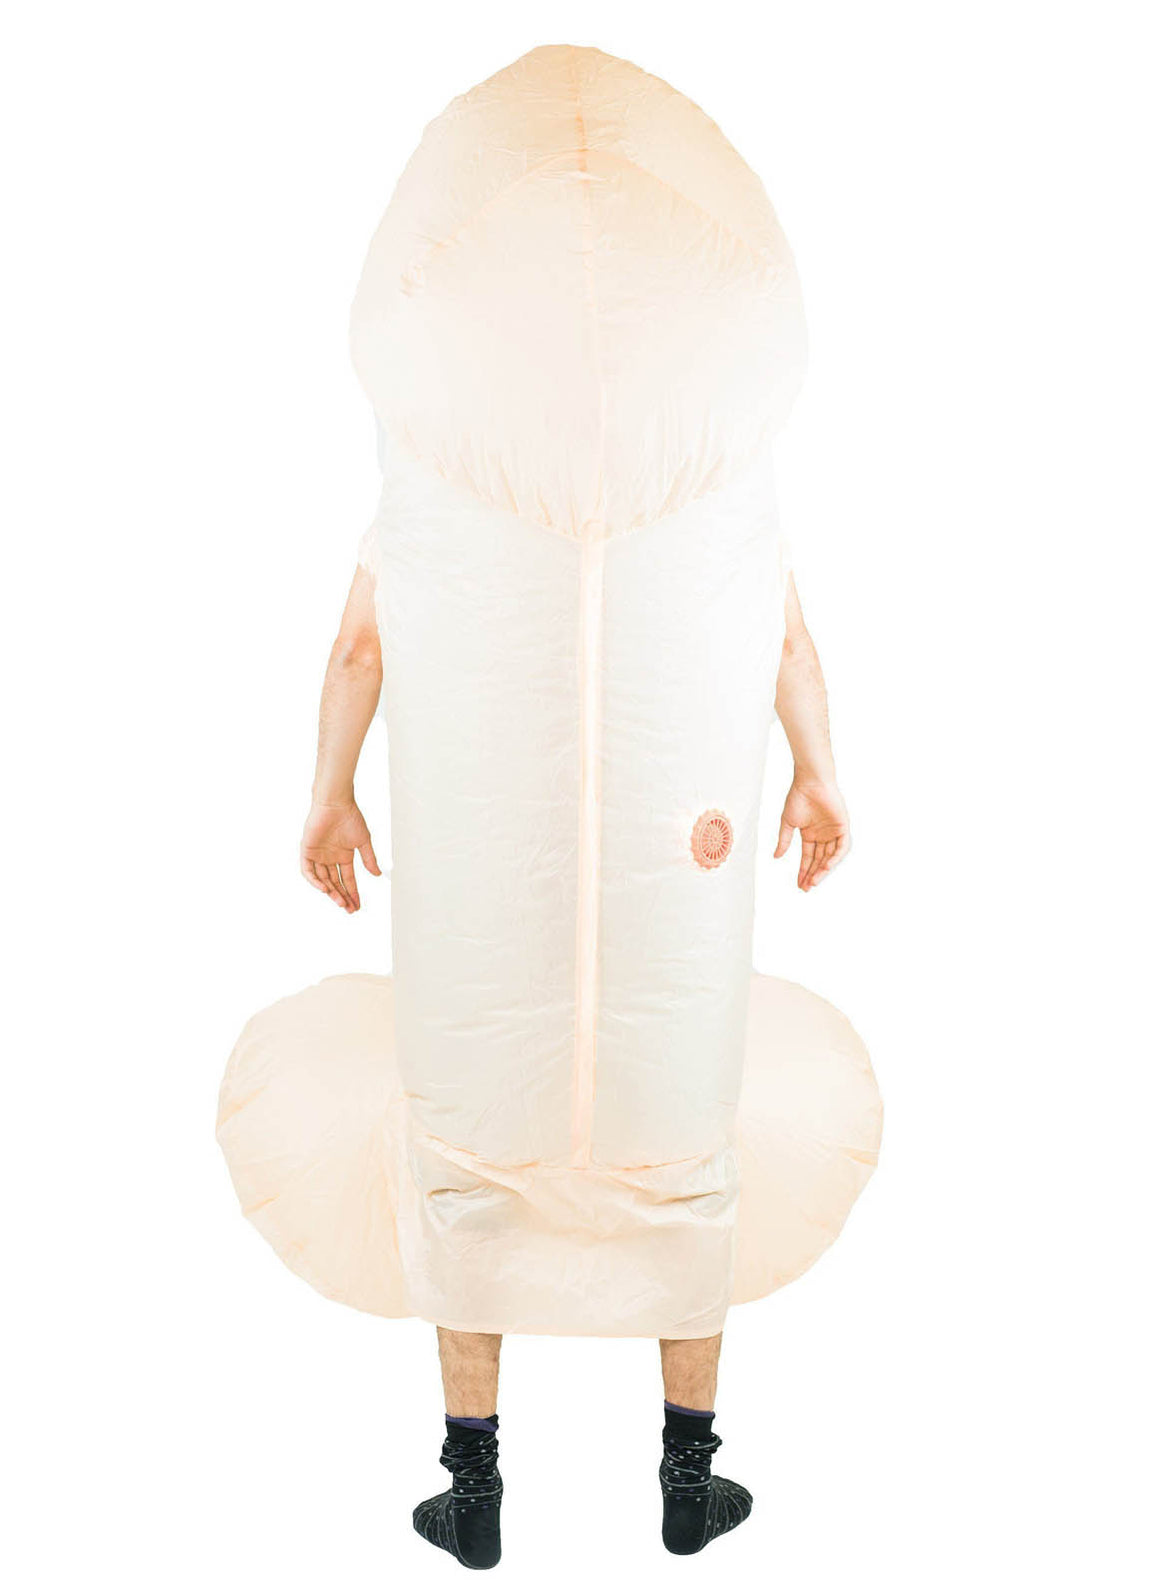 Inflatable Willy Costume Adult — Party Britain